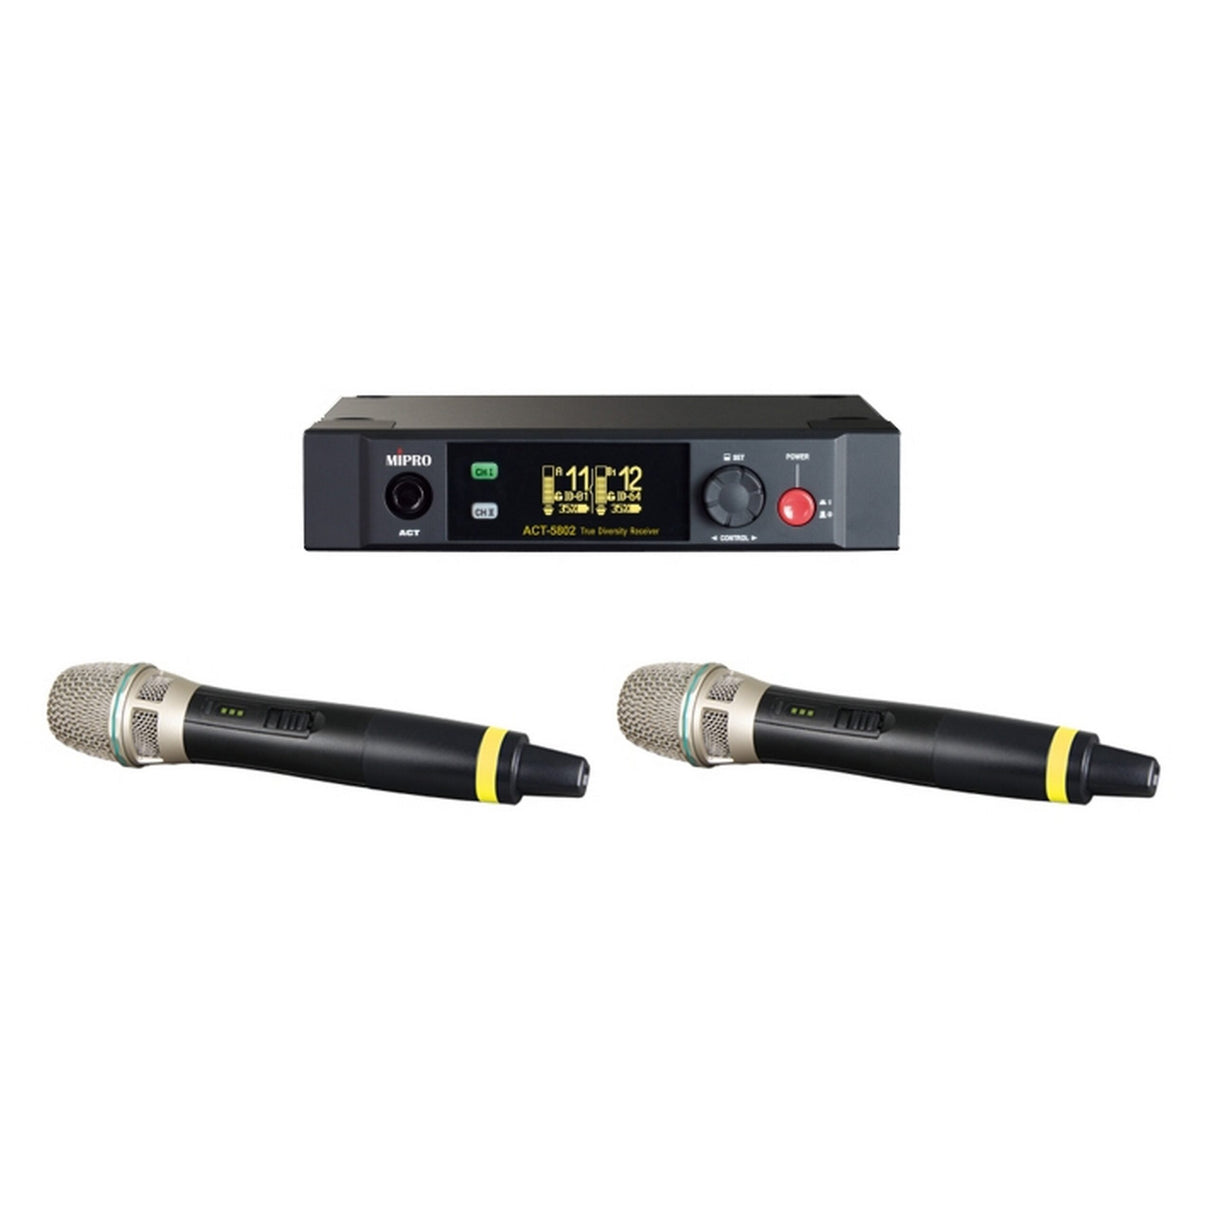 MIPRO ACT-5802/ACT-58H2 ISM 5 GHz 1/2U Dual Channel Digital Receiver with 2 Handheld Microphone Transmitters